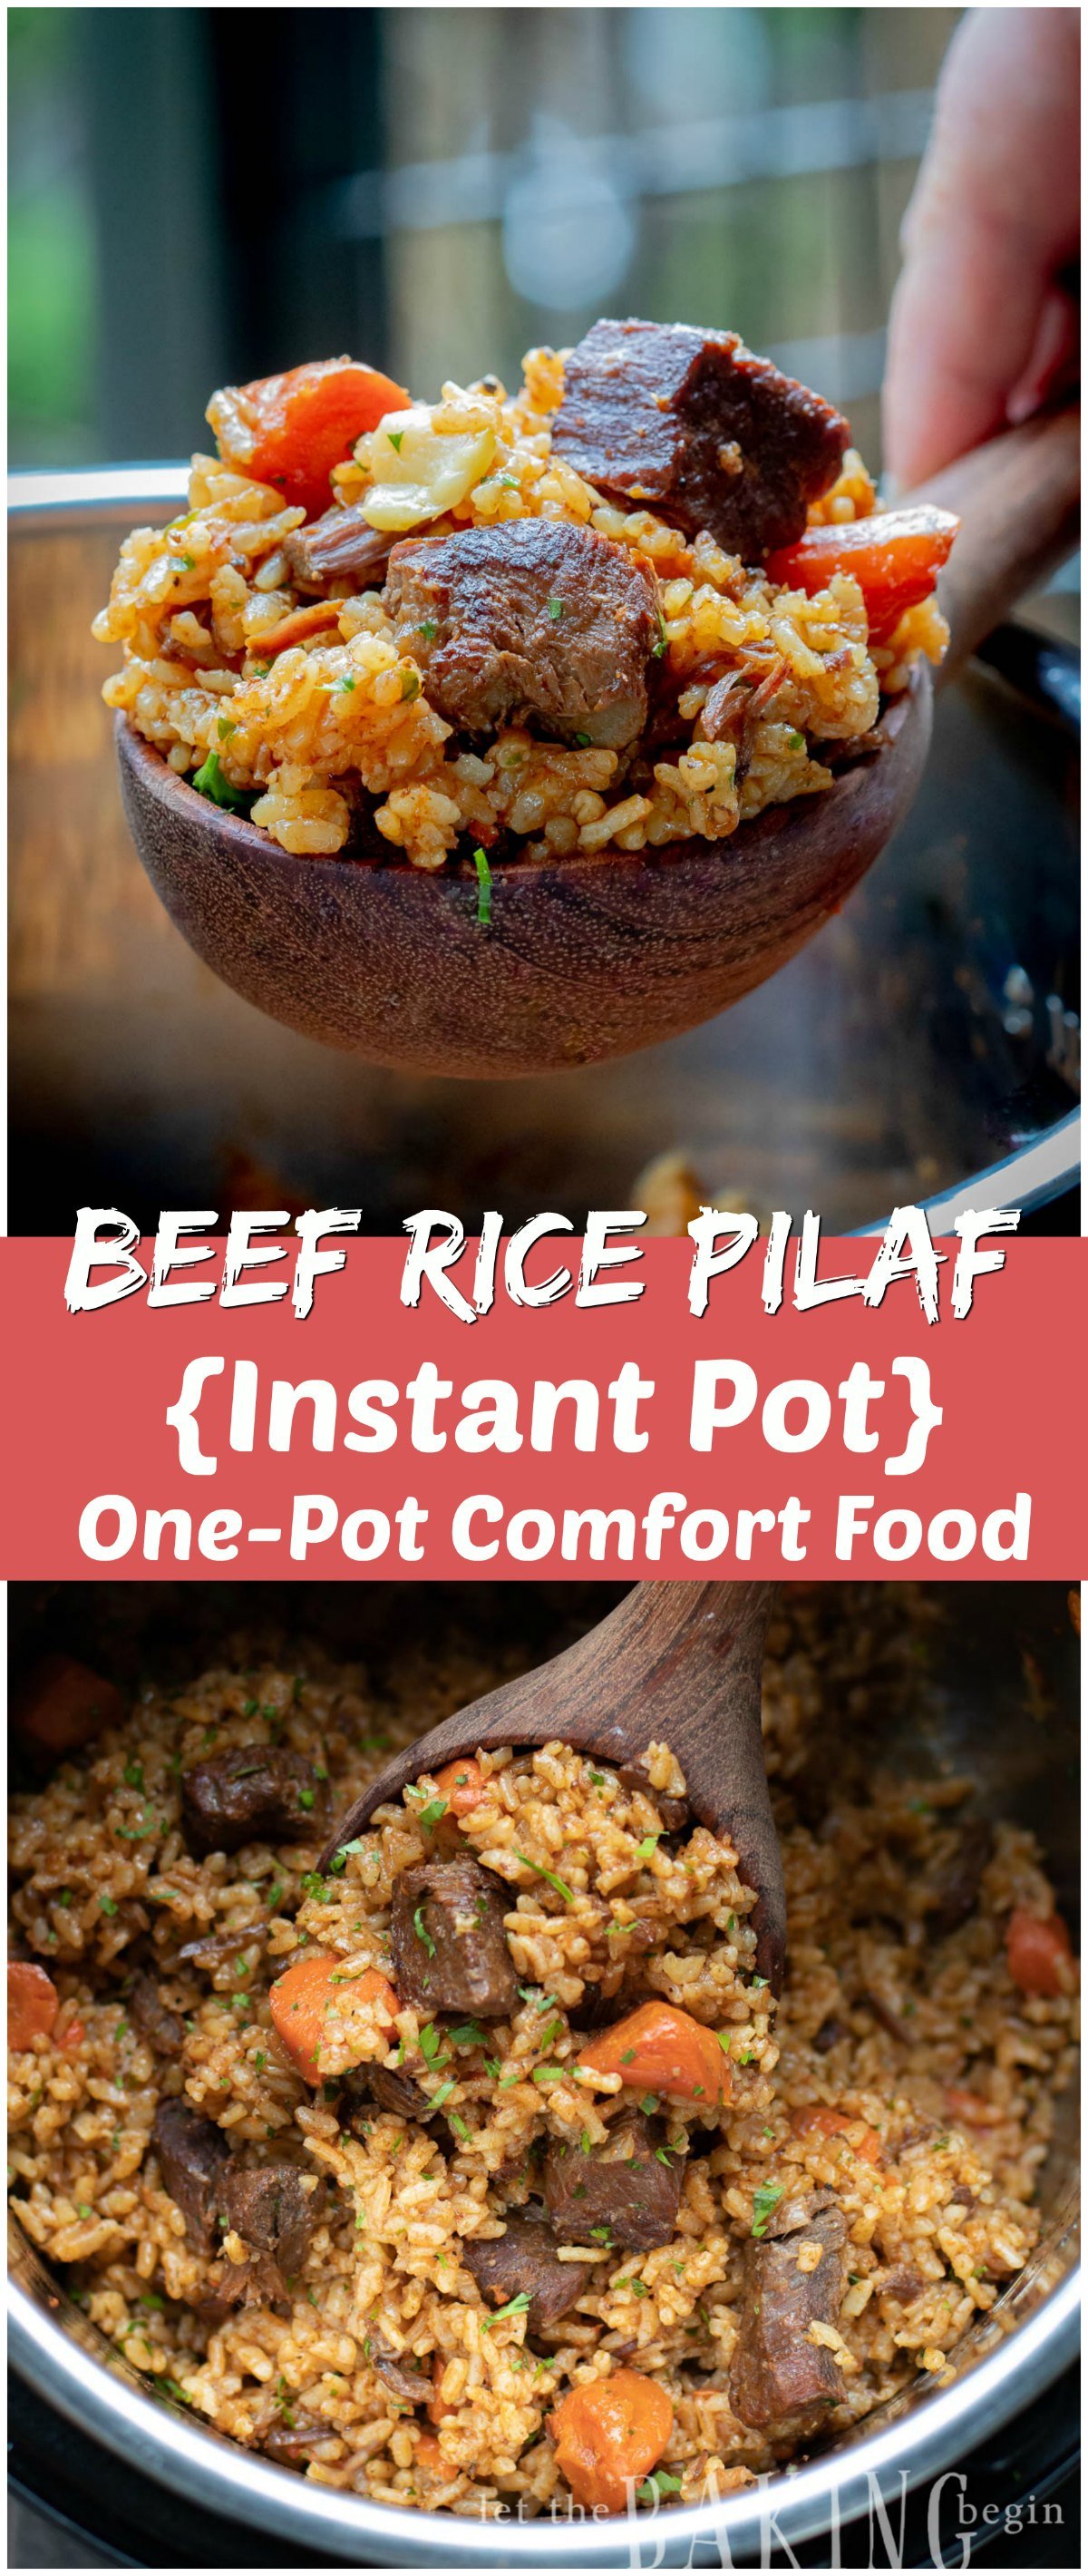 A hearty meal of rice and beef all cooked in one pot at a fraction of the time. The rice is well infused with the flavor of beef and spices and makes the best rice you will ever have!